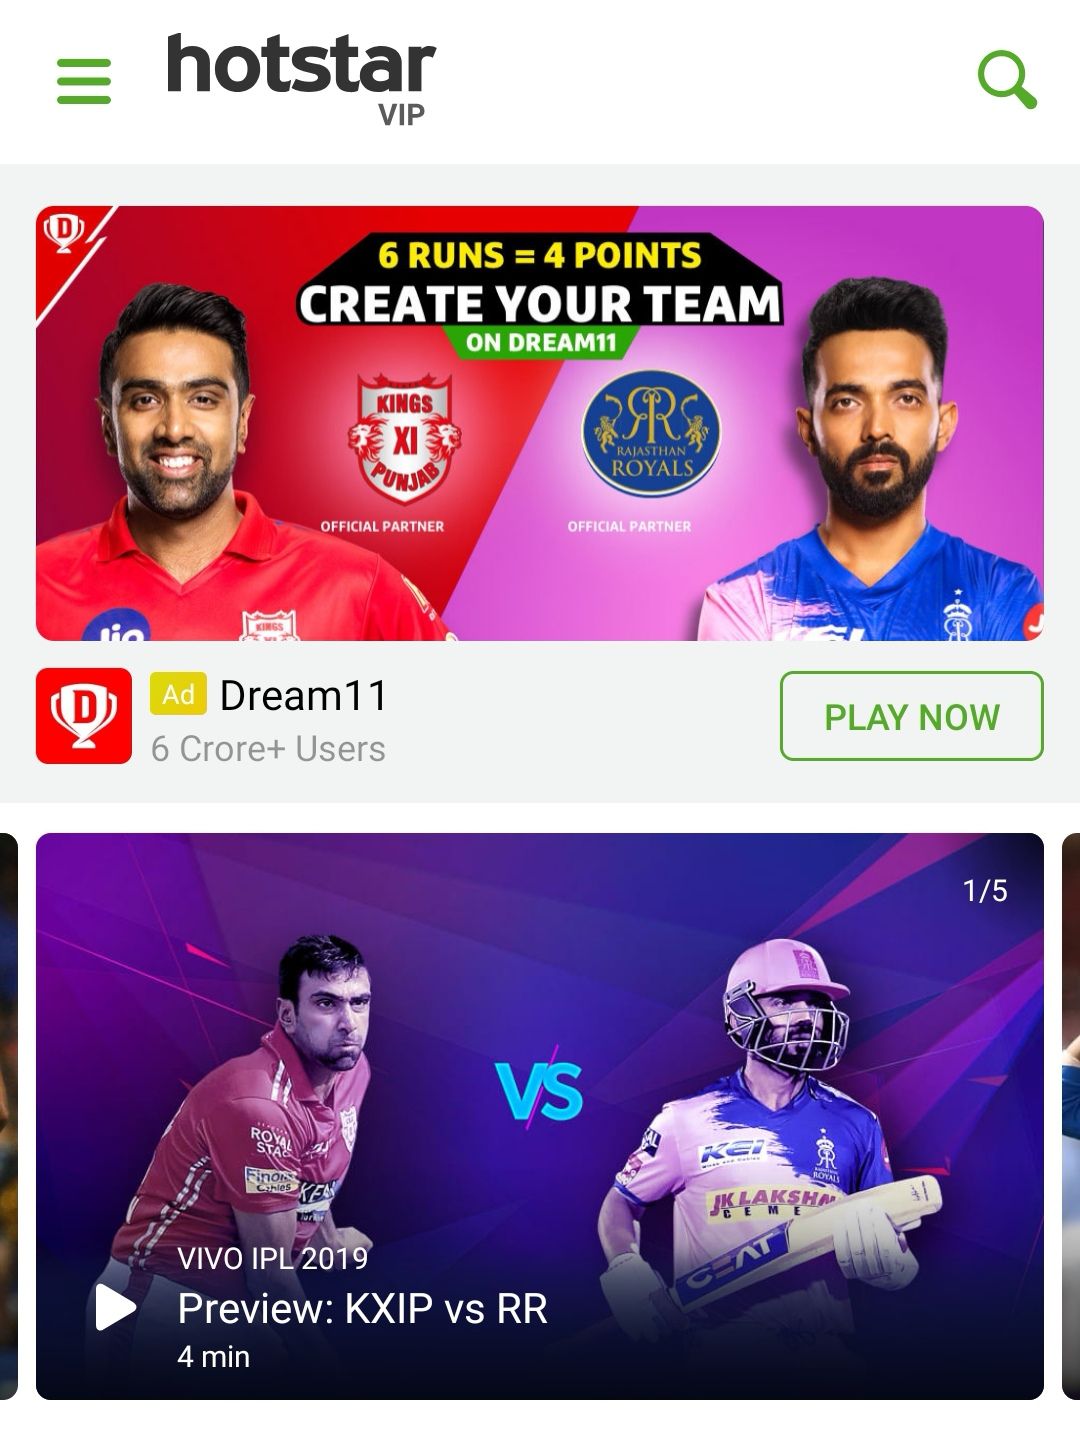 This IPL, Hotstar is on a record-breaking spree and its not over yet